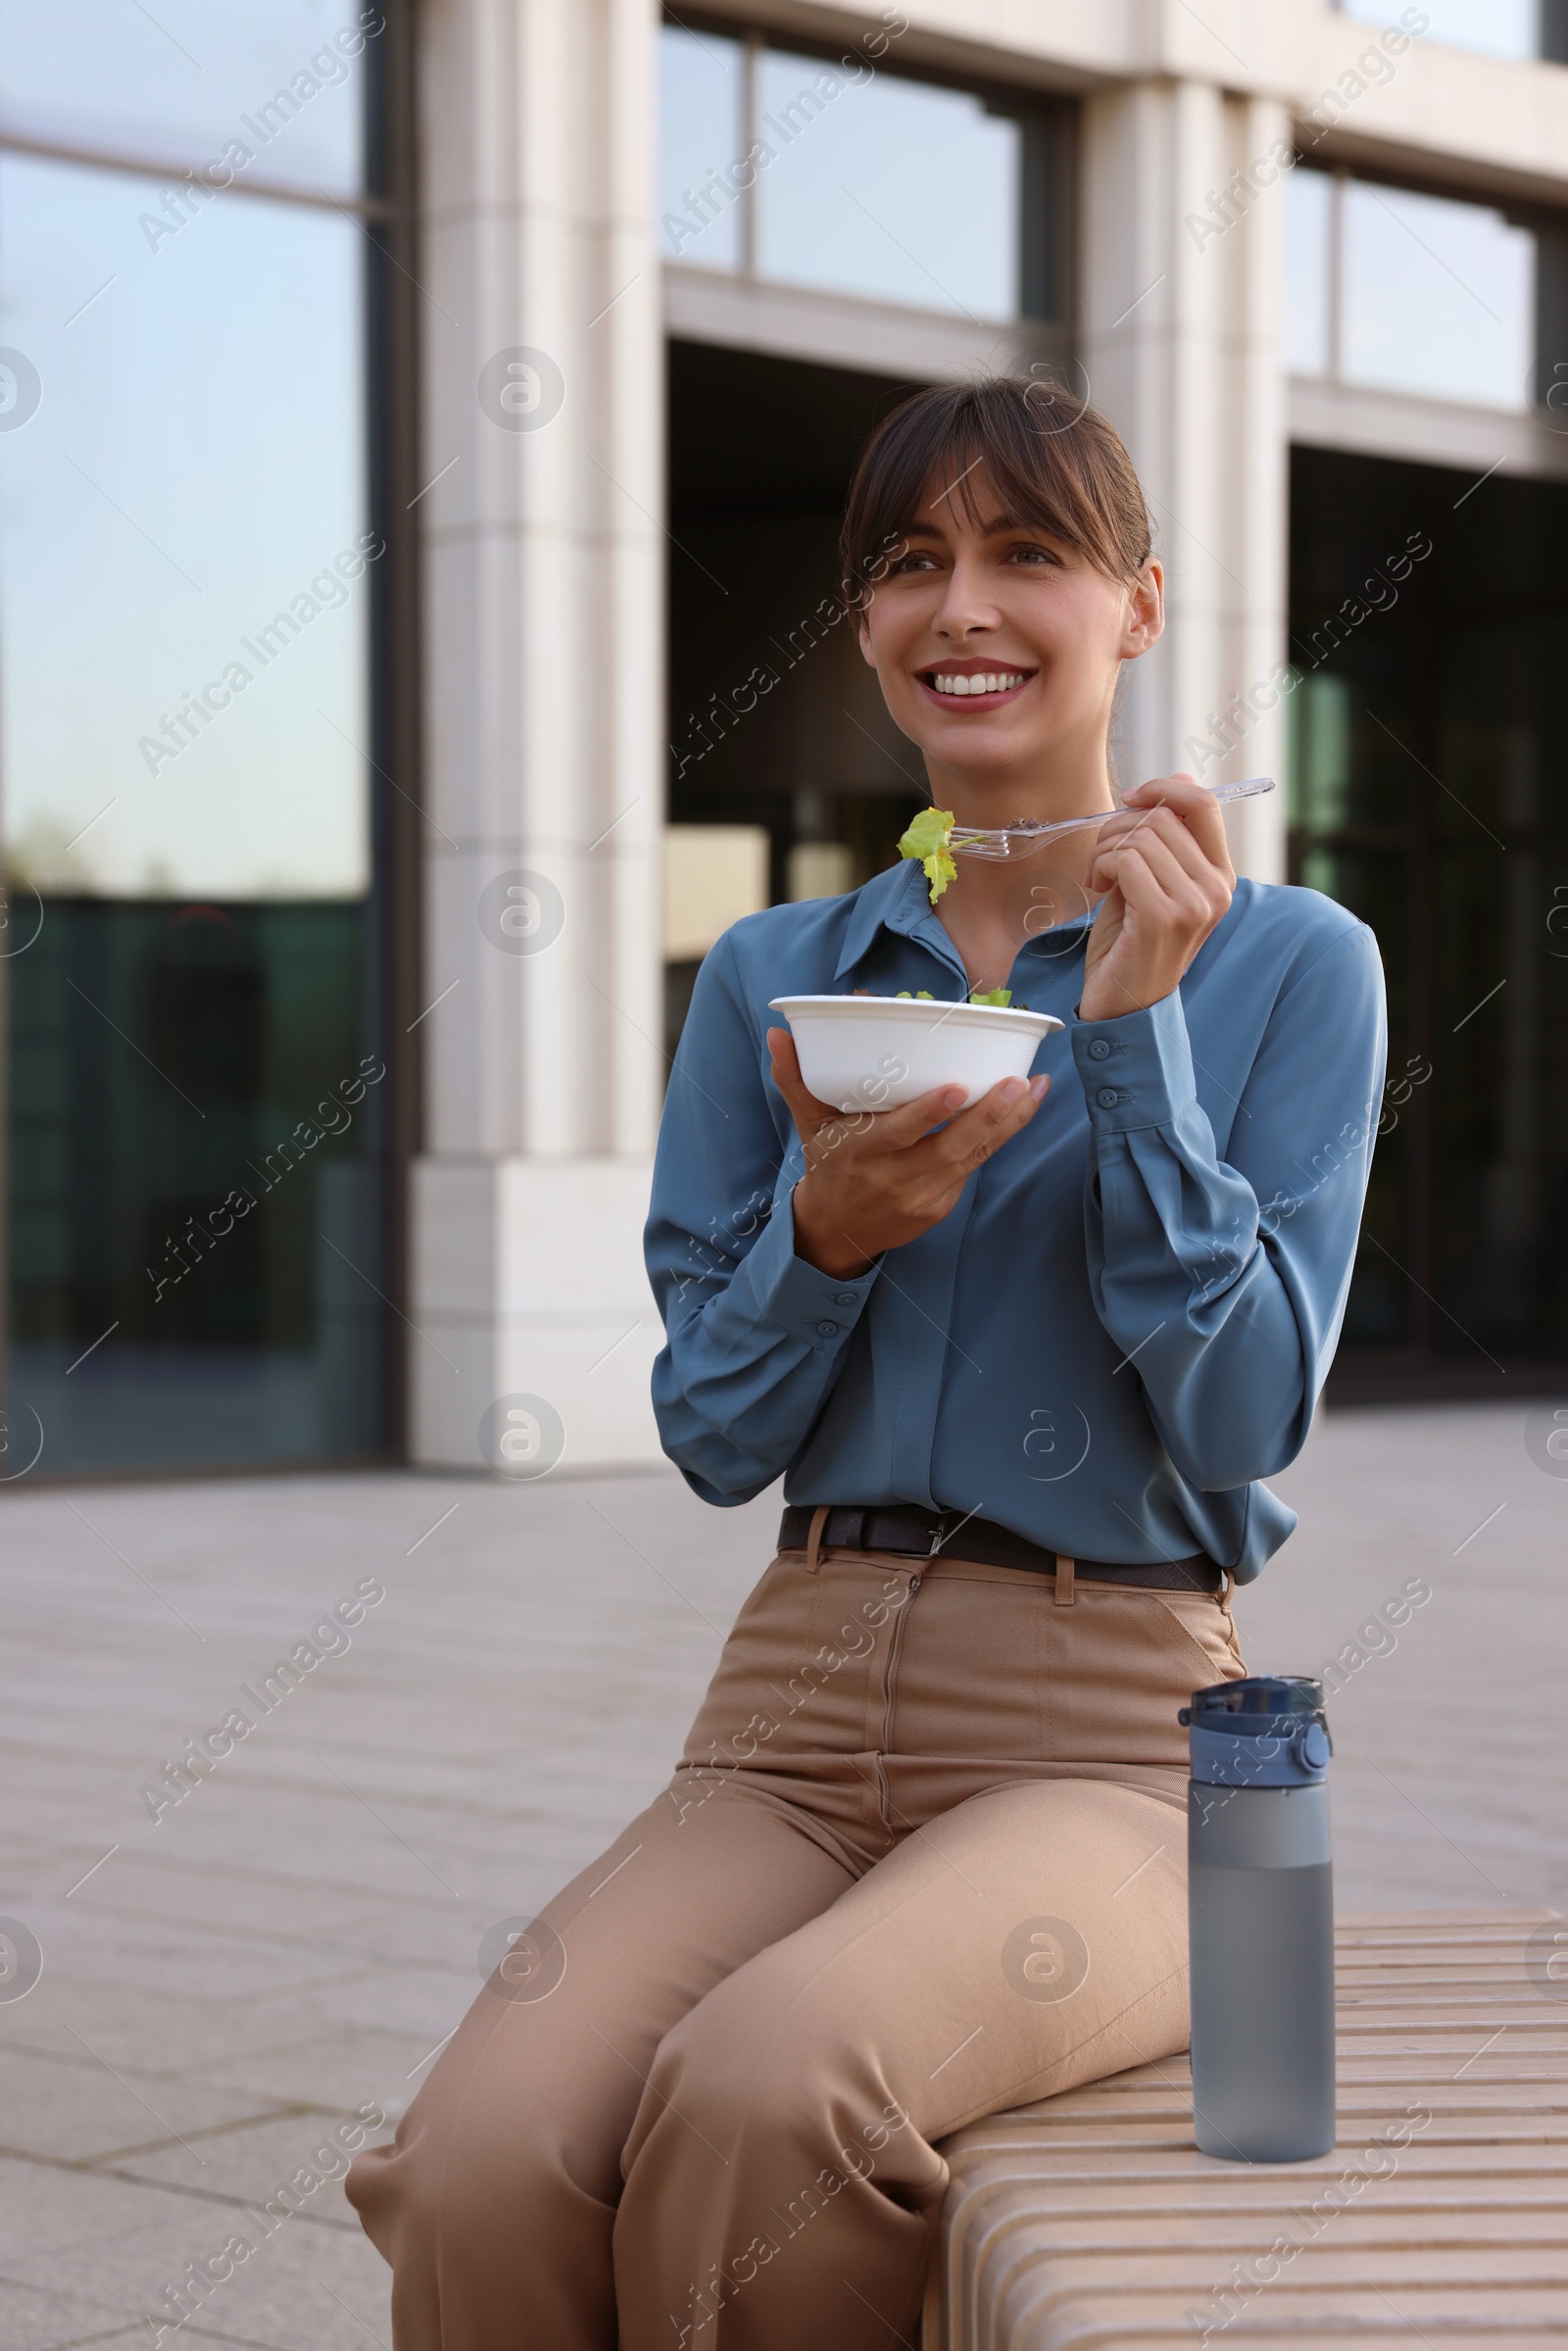 Photo of Happy businesswoman with plastic bowl of salad and bottle of water having lunch on bench outdoors